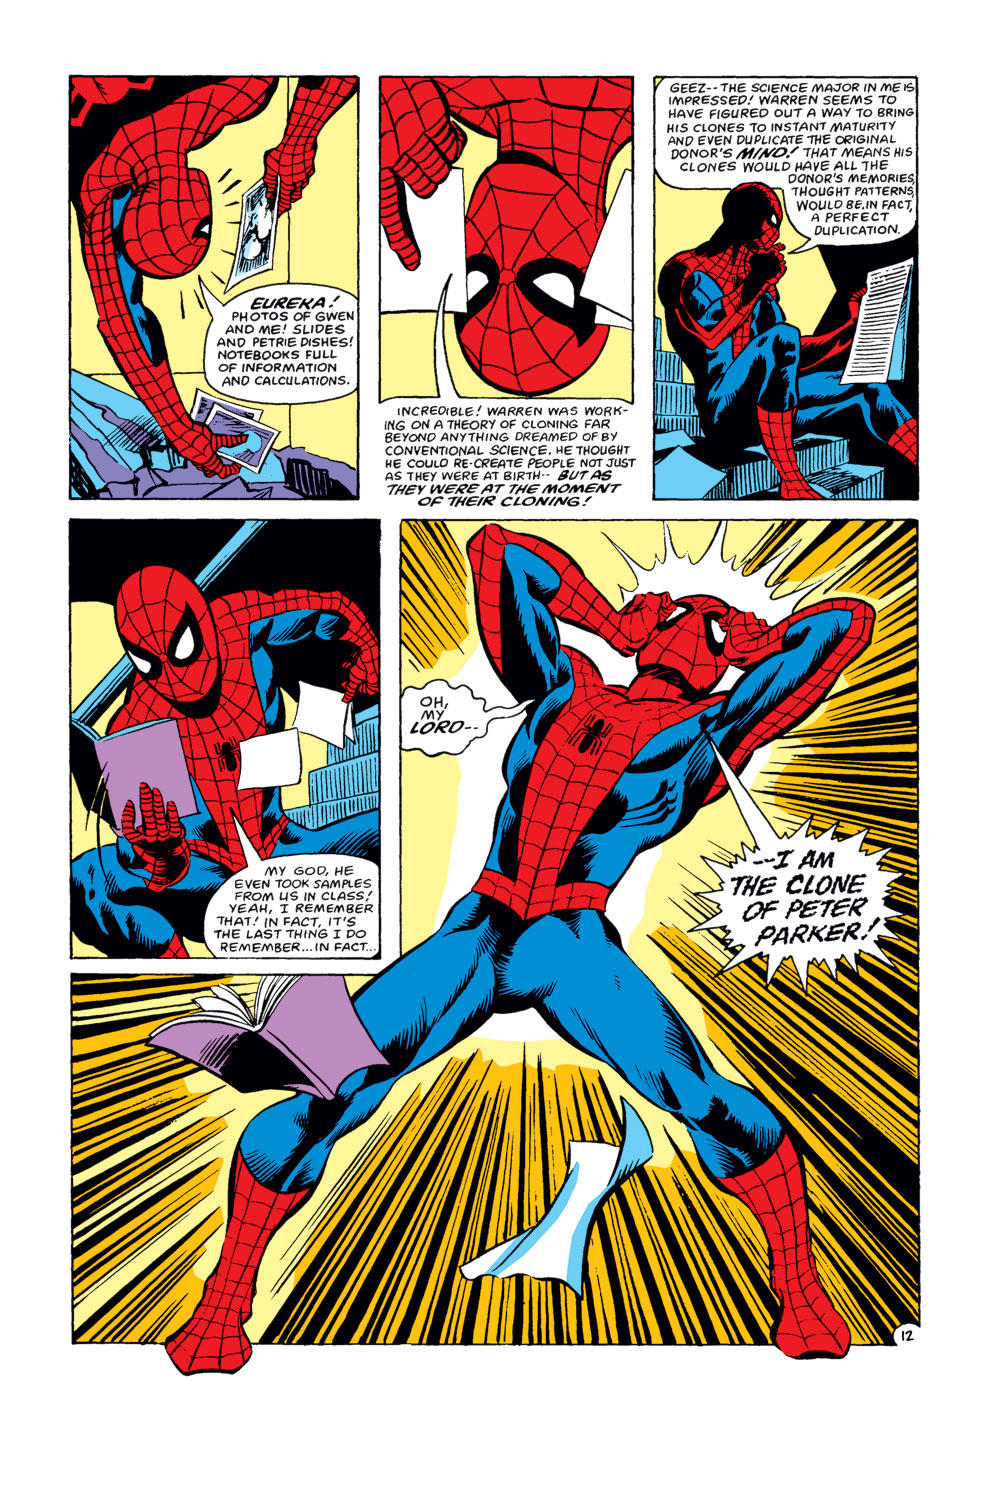 What If? (1977) issue 30 - Spider-Man's clone lived - Page 13